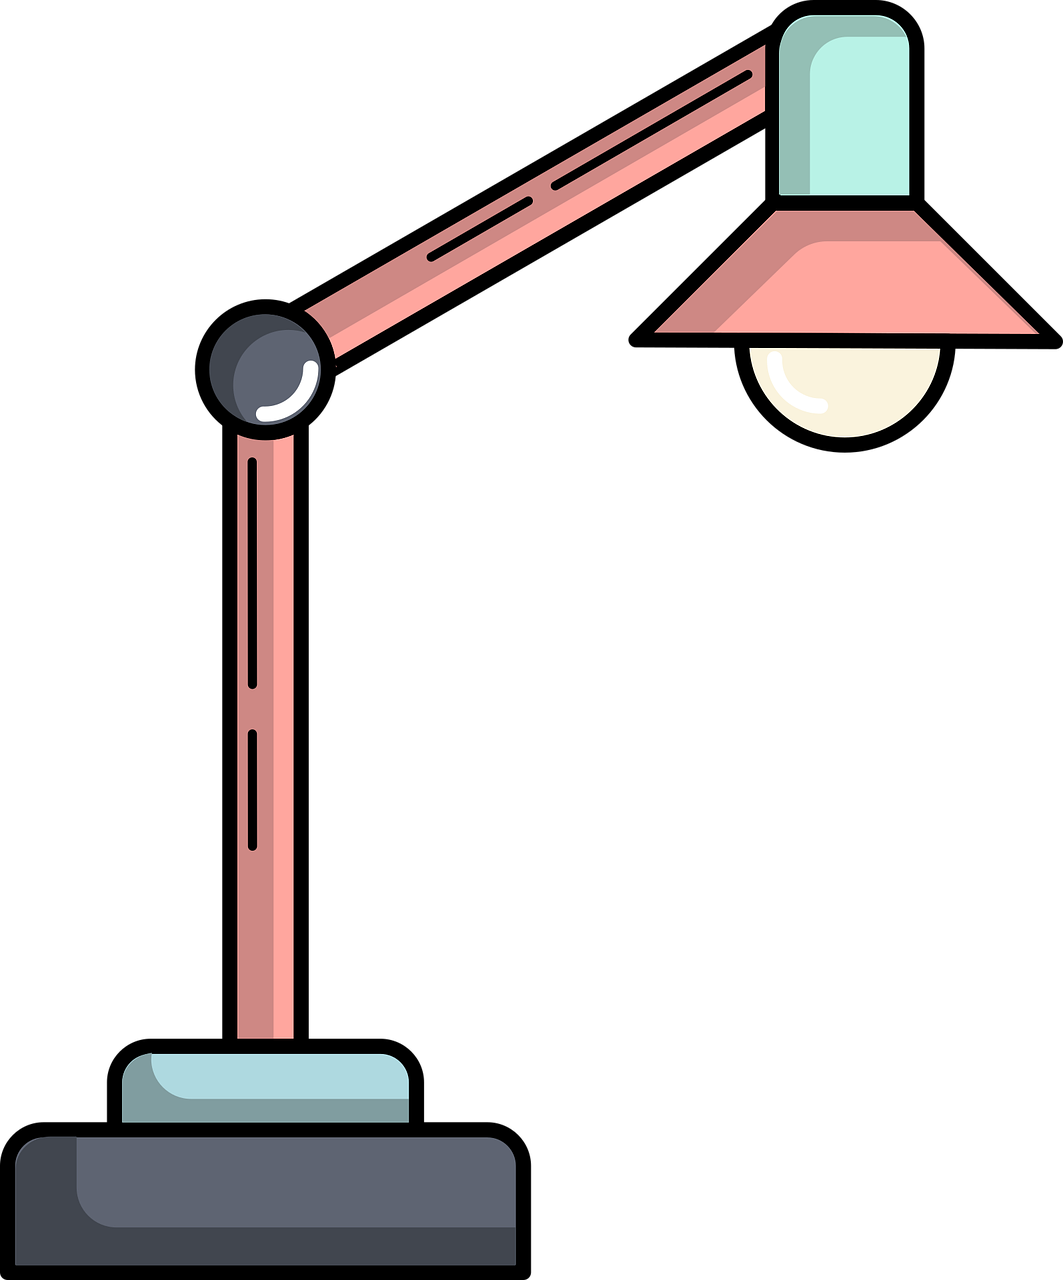 a lamp that is on top of a table, concept art, by Andrei Kolkoutine, pixabay, figuration libre, flat color, long arm, pink light, crane